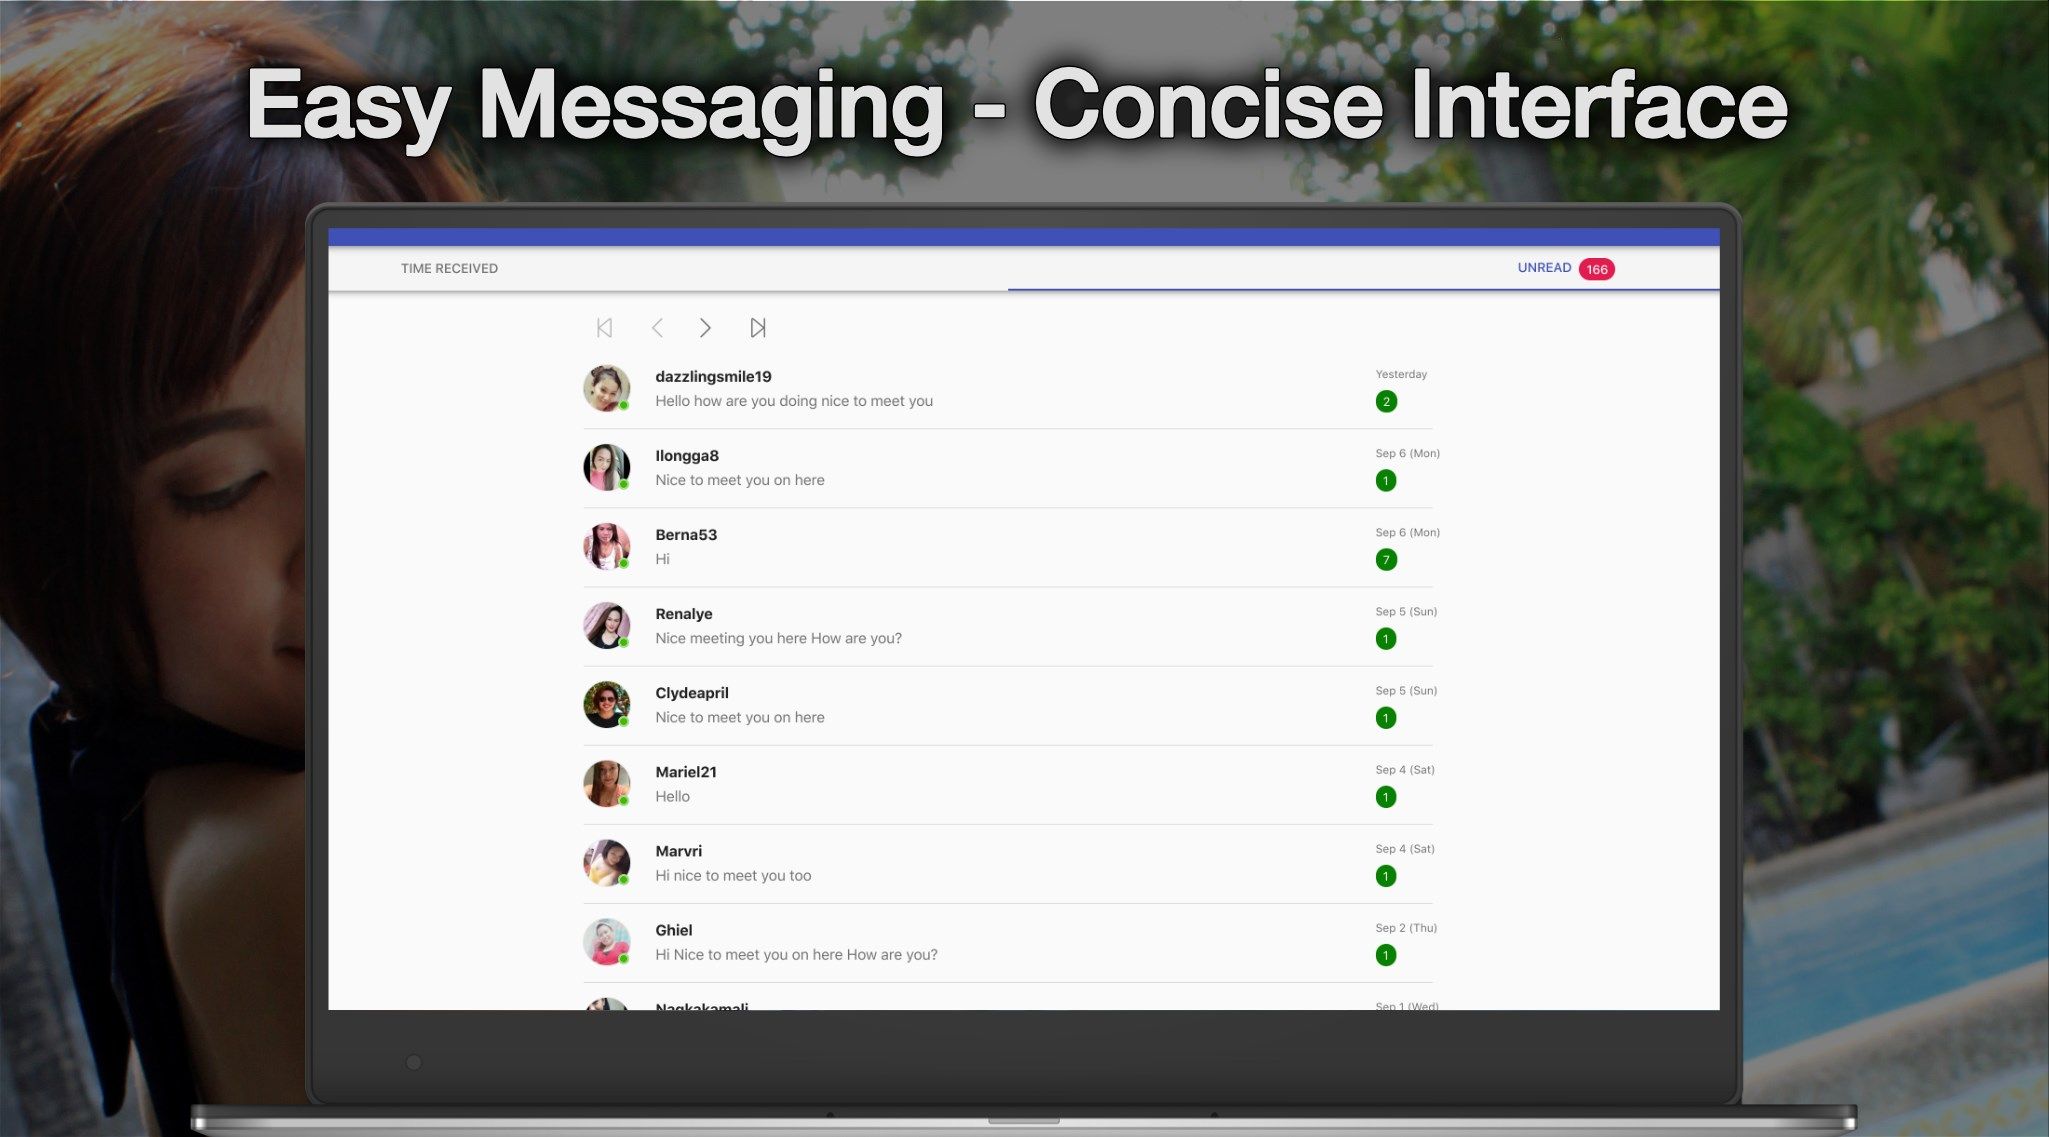 Get easy messaging - an interface you already know & understand